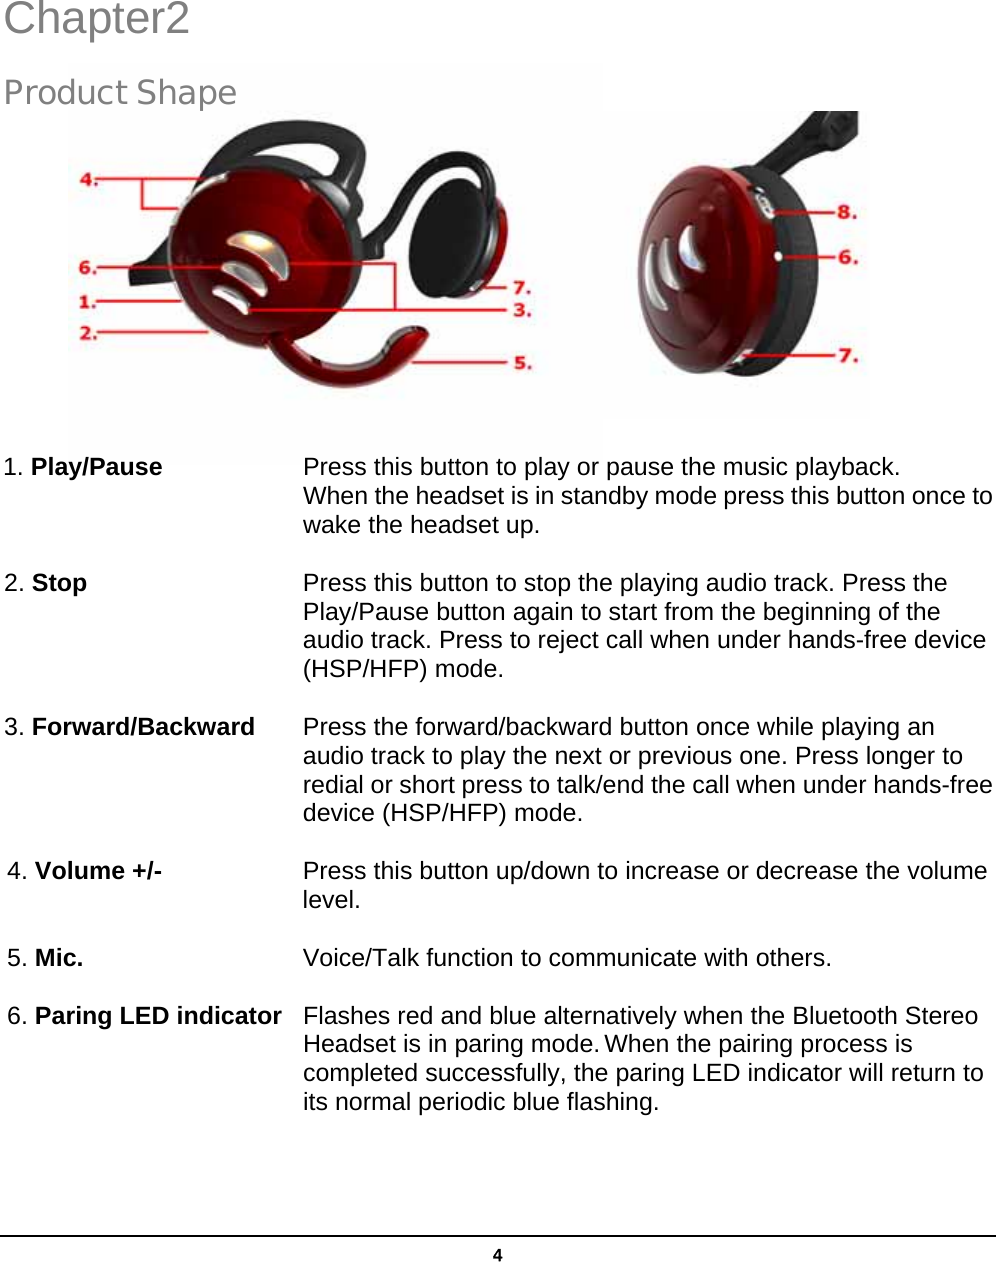   4 Chapter2 Product Shape           1. Play/Pause  Press this button to play or pause the music playback.           When the headset is in standby mode press this button once to wake the headset up.  2. Stop  Press this button to stop the playing audio track. Press the Play/Pause button again to start from the beginning of the audio track. Press to reject call when under hands-free device (HSP/HFP) mode.    3. Forward/Backward  Press the forward/backward button once while playing an audio track to play the next or previous one. Press longer to redial or short press to talk/end the call when under hands-free   device (HSP/HFP) mode.  4. Volume +/-  Press this button up/down to increase or decrease the volume     level.  5. Mic.  Voice/Talk function to communicate with others.  6. Paring LED indicator  Flashes red and blue alternatively when the Bluetooth Stereo          Headset is in paring mode. When the pairing process is                 completed successfully, the paring LED indicator will return to        its normal periodic blue flashing.  2 